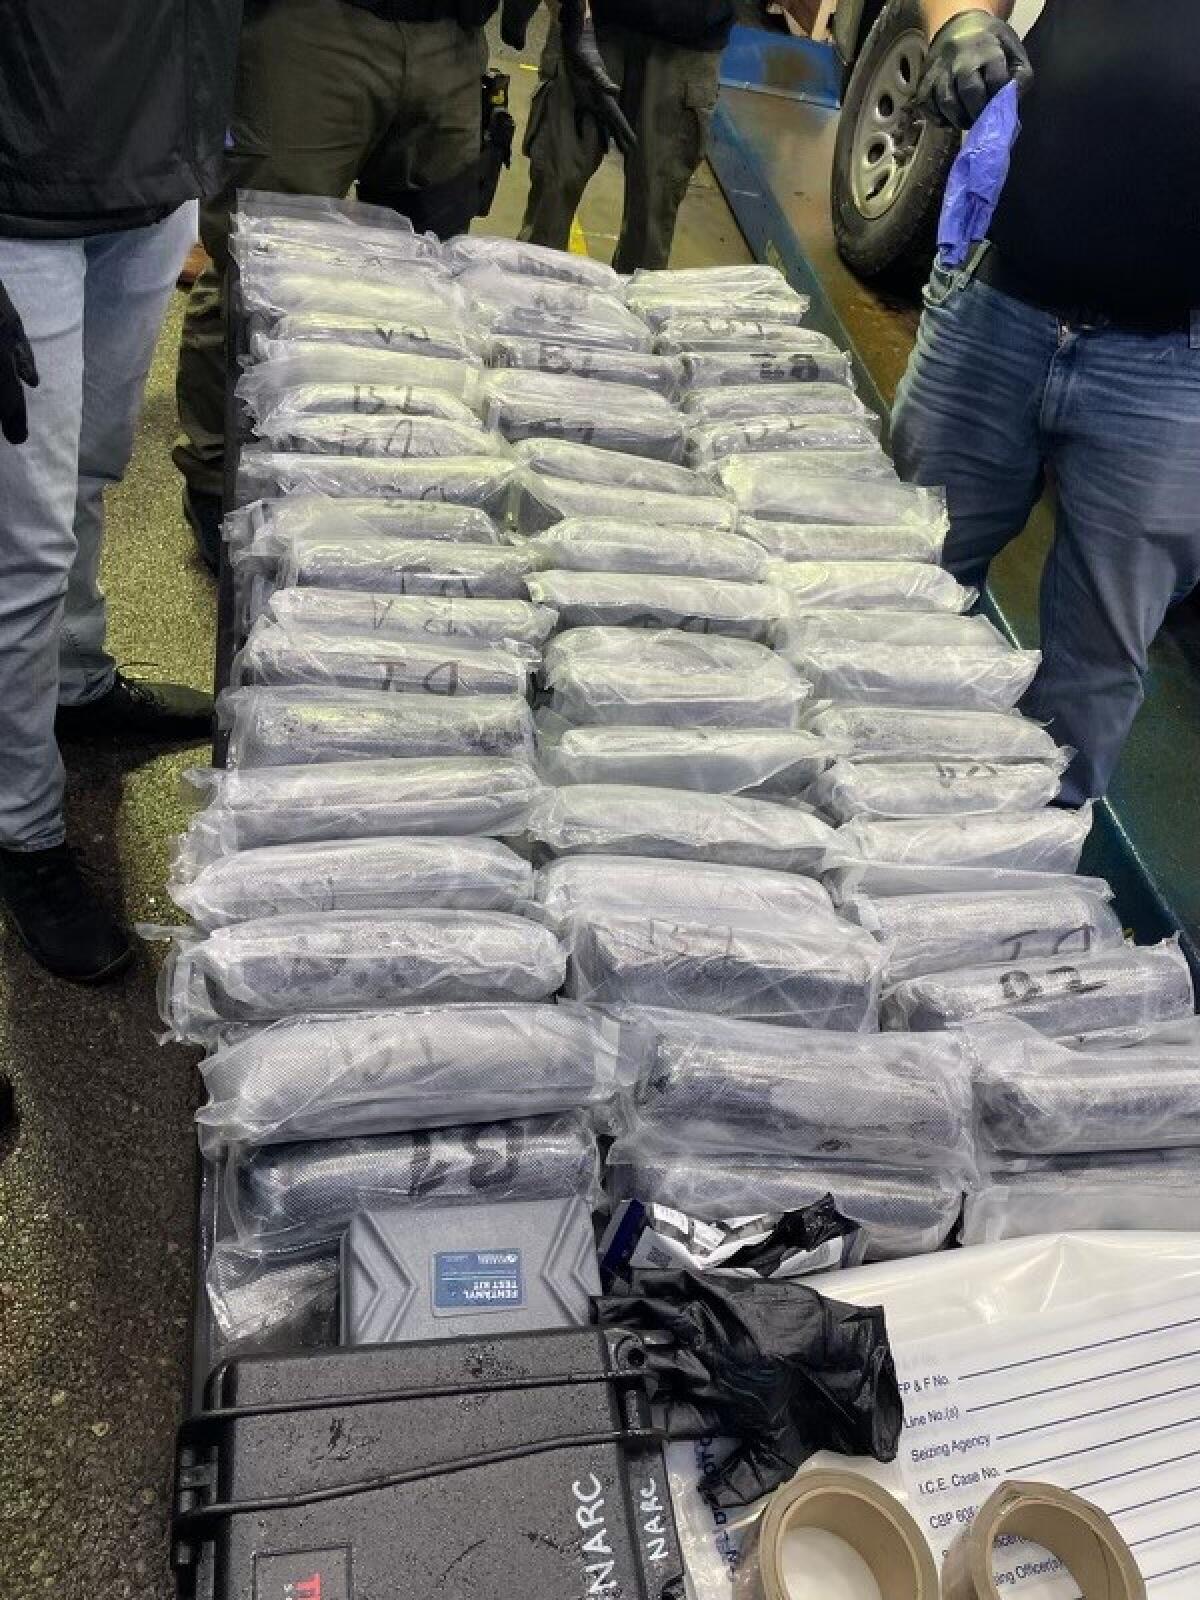 Fentanyl task force seizes 720,000 pills in 'massive bust' in